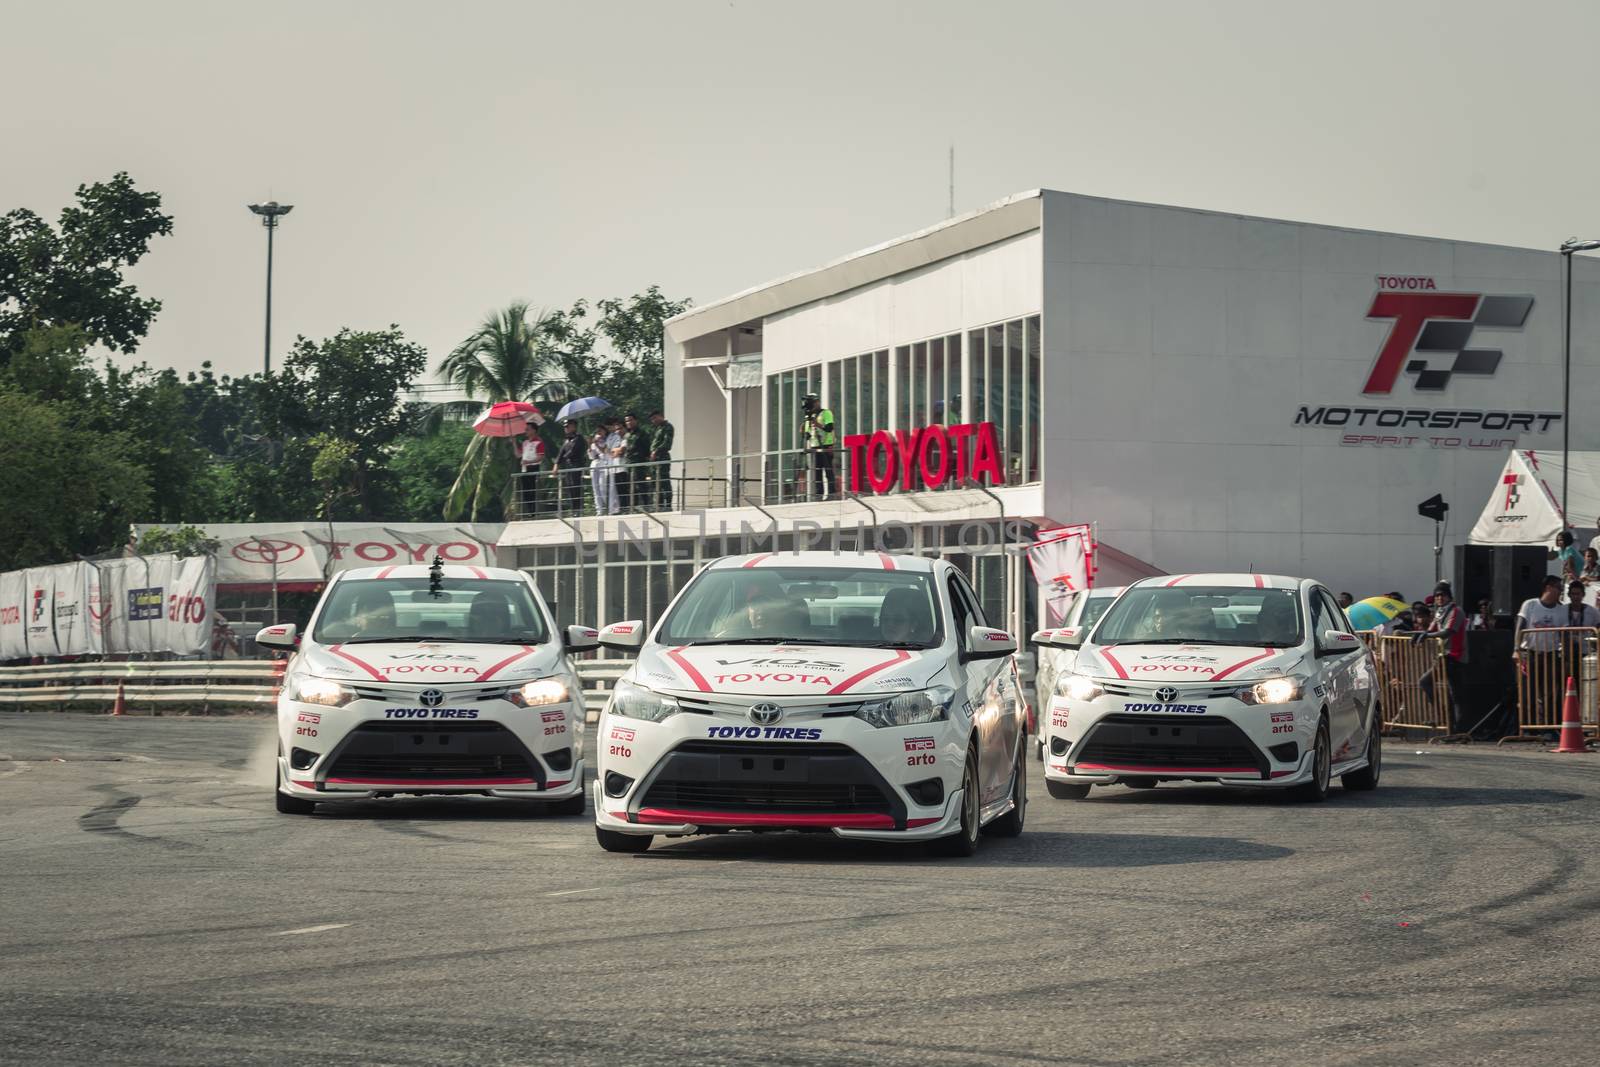 Udon Thani, Thailand - October 18, 2015: Toyota Colora Altis perform drifting on the track at the event Toyota Motor Sport show at Udon Thani, Thailand with people looking in the background